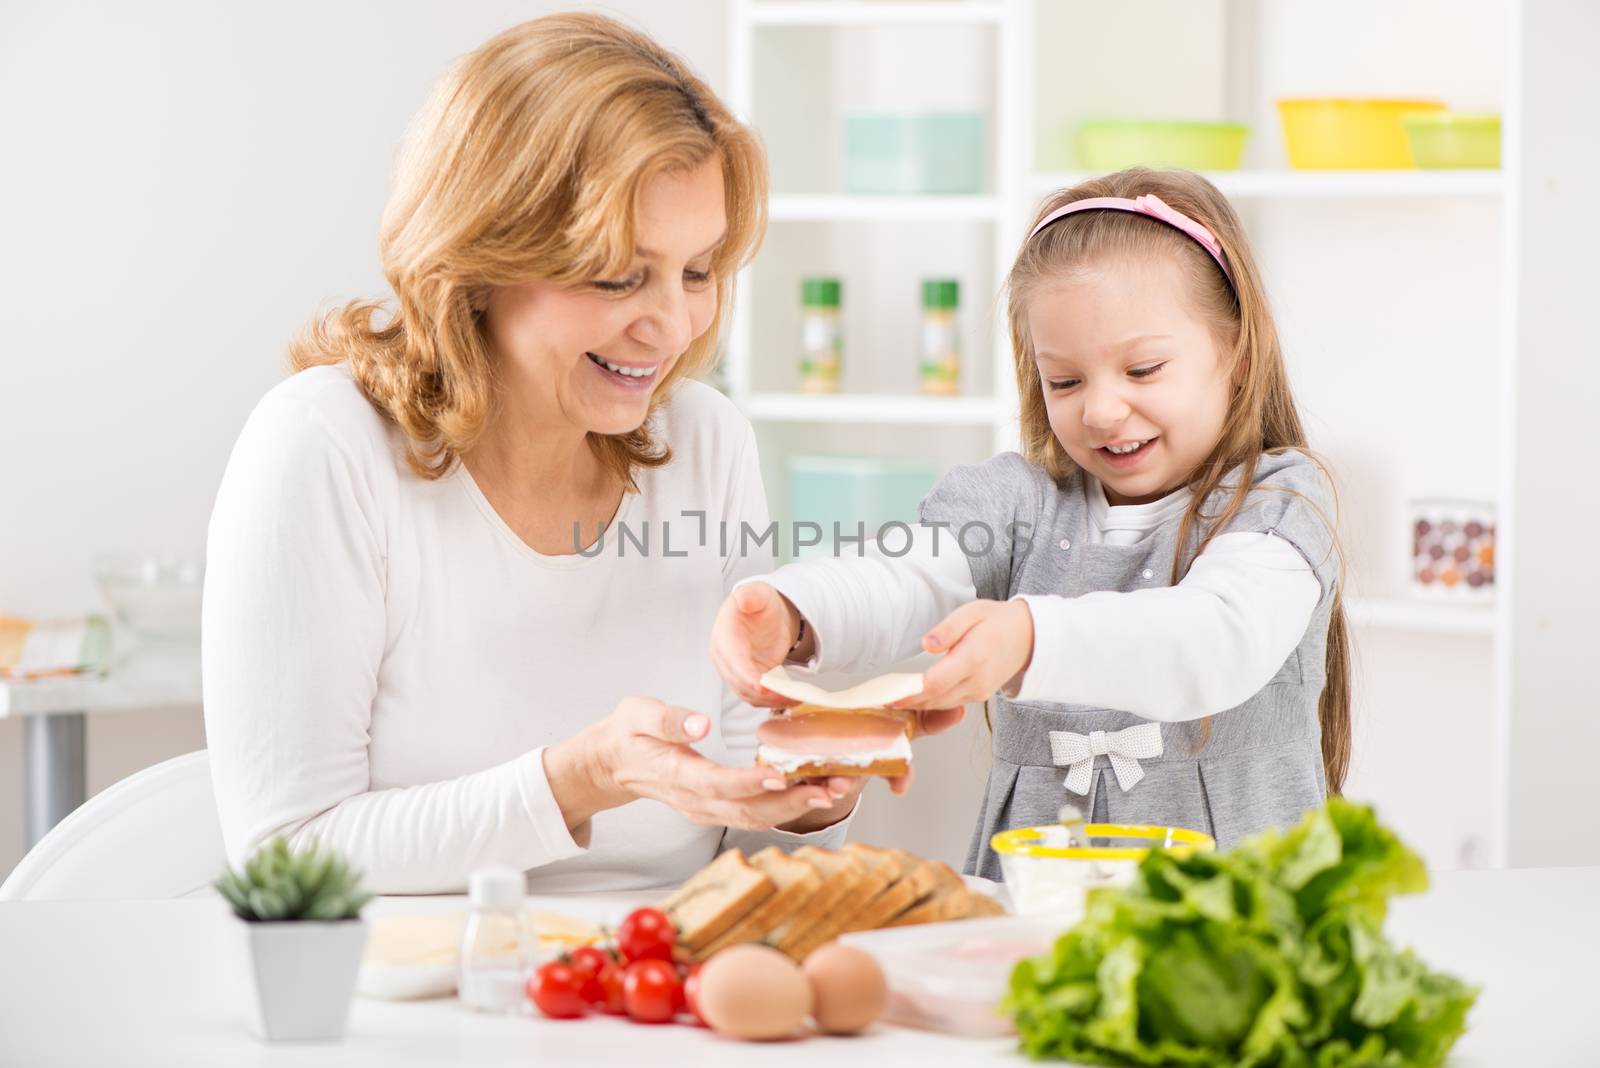 Cute little girl with Grandmother making a Sandwich in the kitchen.